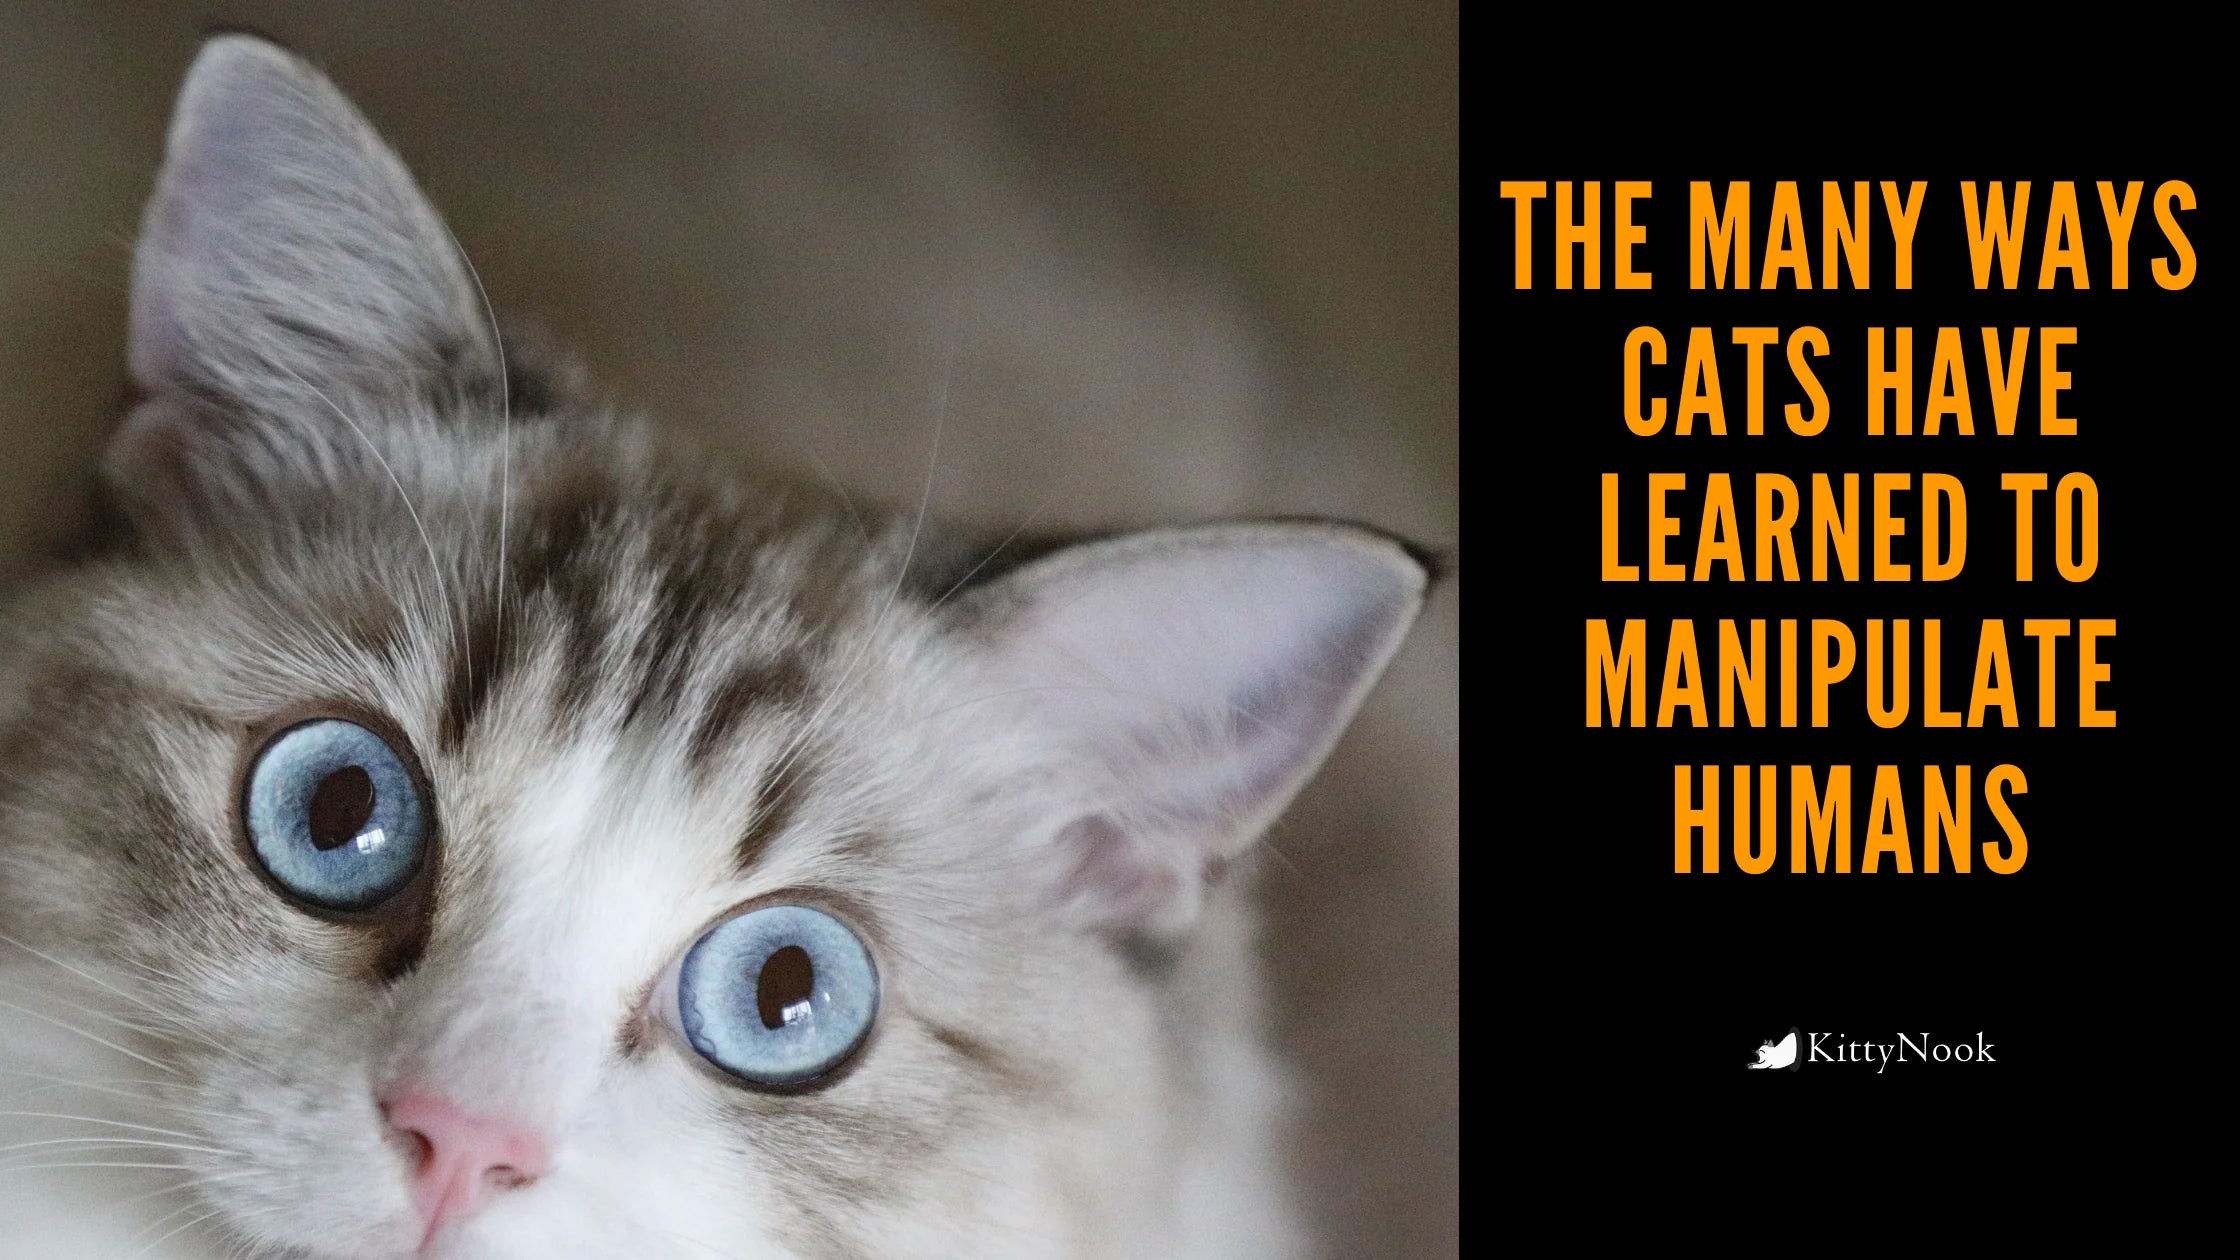 The Many Ways Cats Have Learned to Manipulate Humans - KittyNook Cat Company